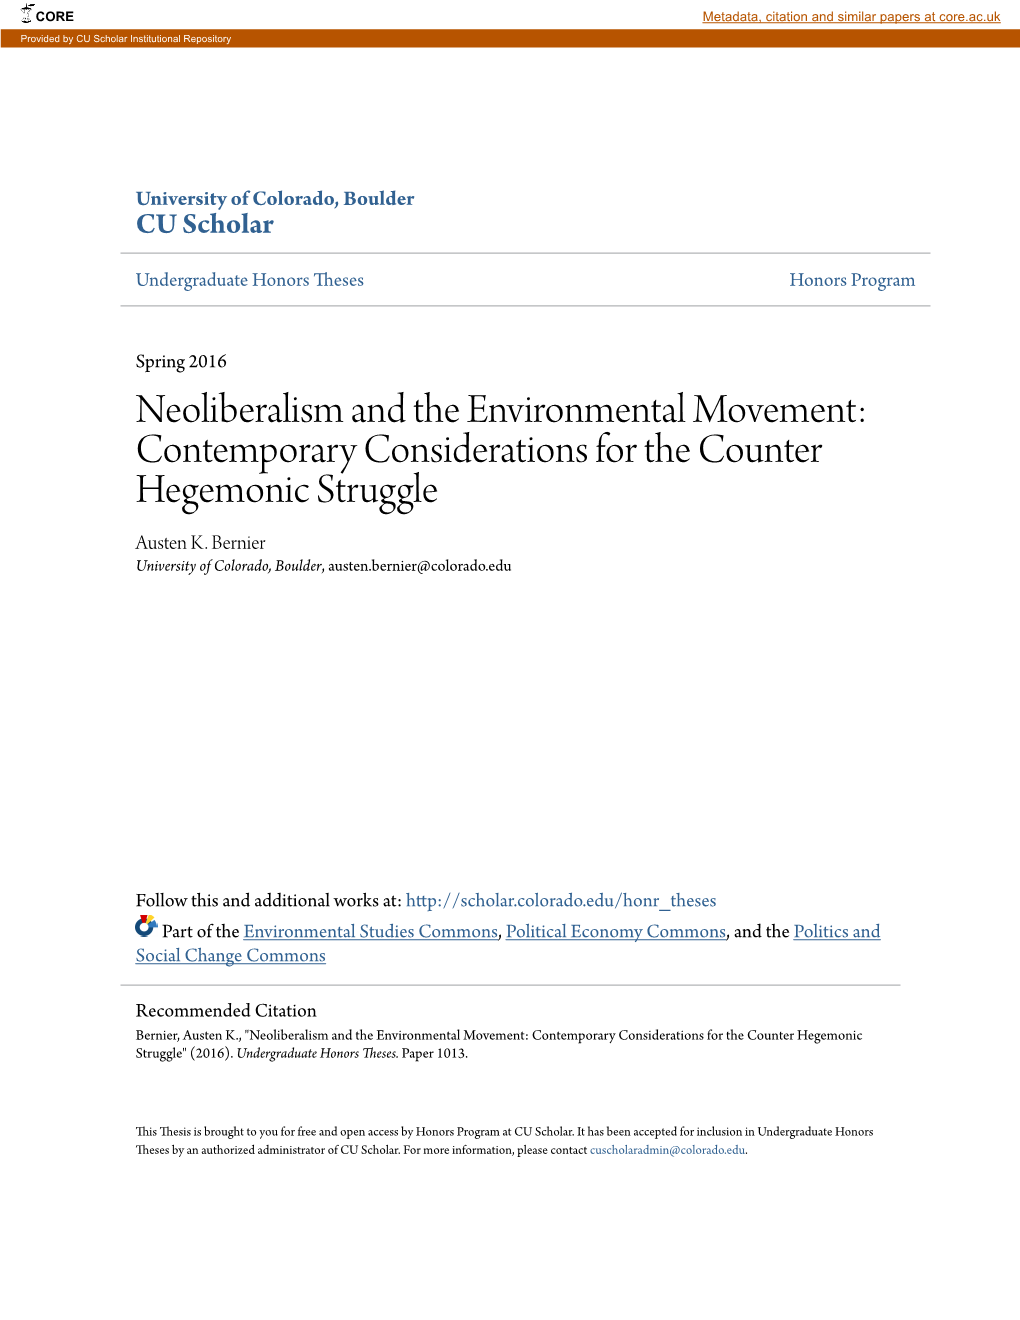 Neoliberalism and the Environmental Movement: Contemporary Considerations for the Counter Hegemonic Struggle Austen K